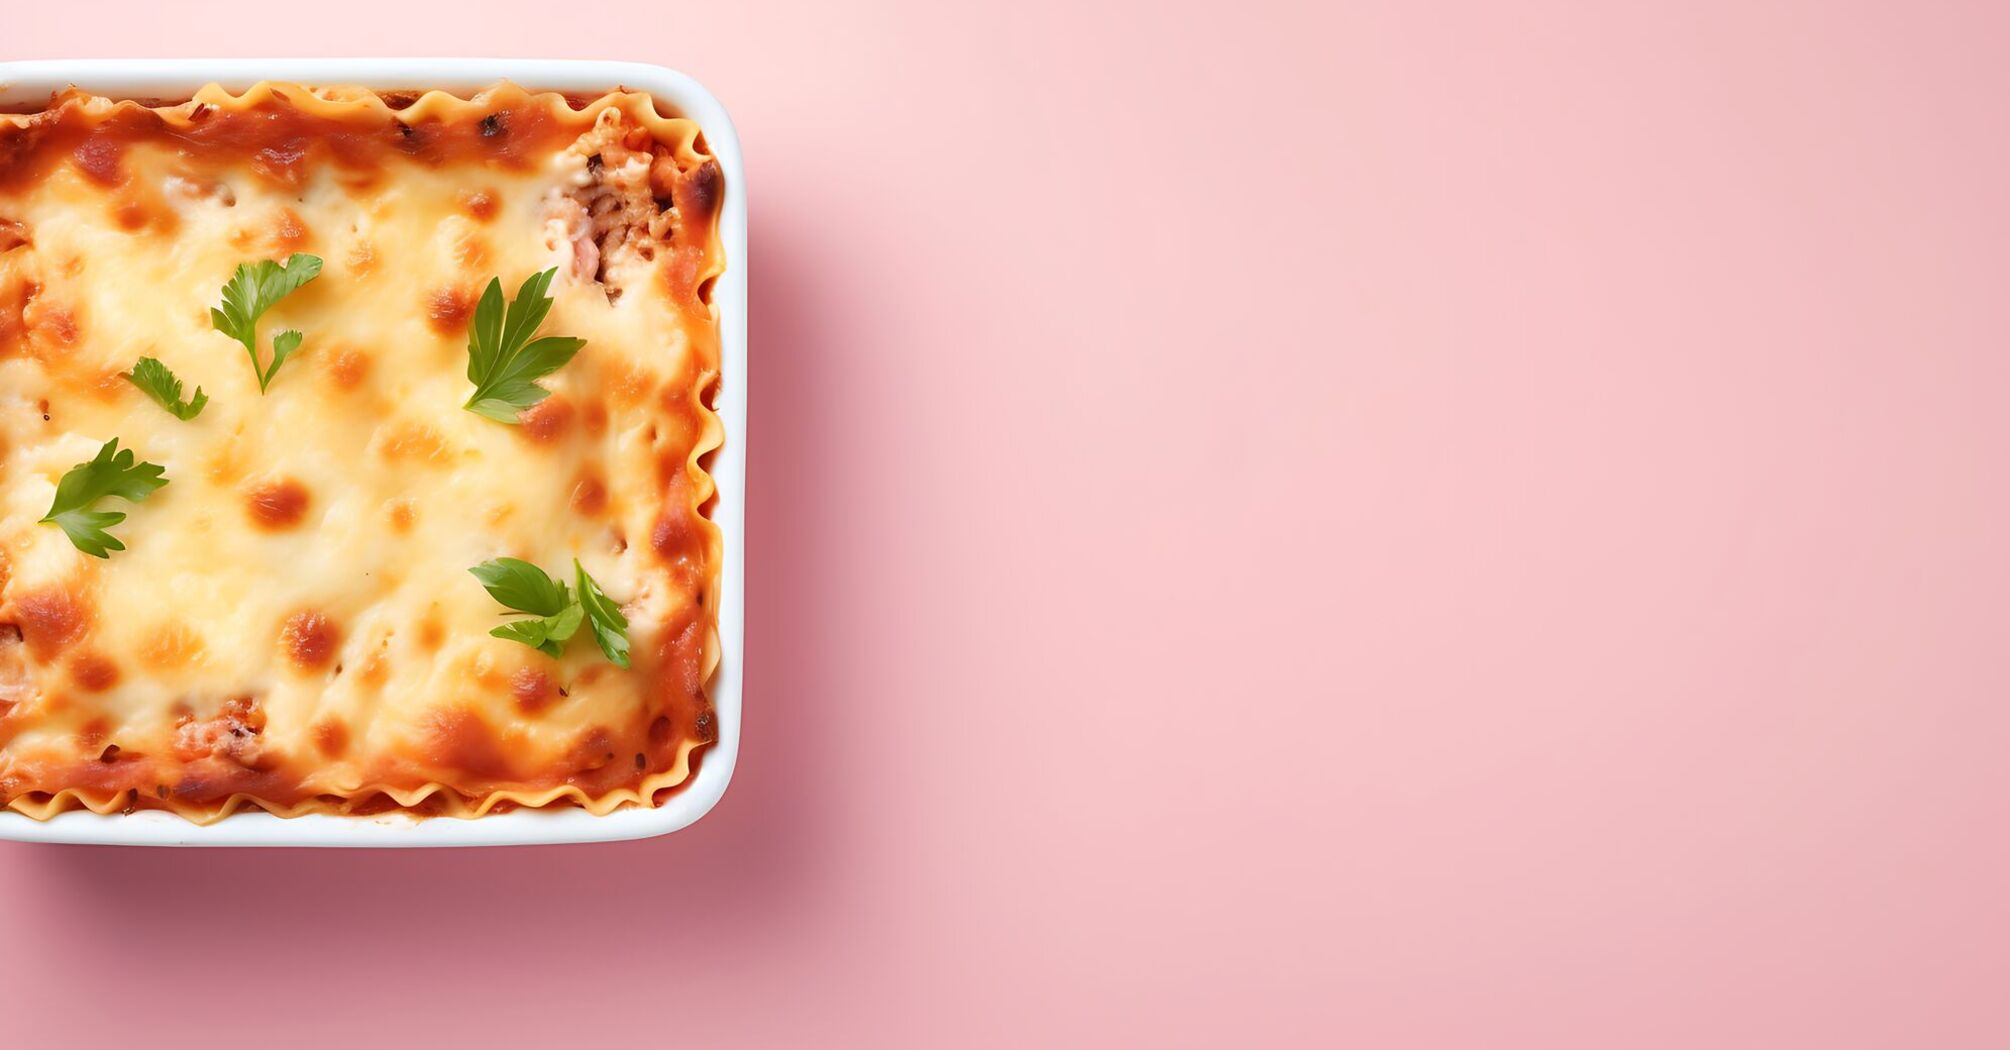 Sausage casserole for a large family: a mother of 12 children tells the secret of a budget dish